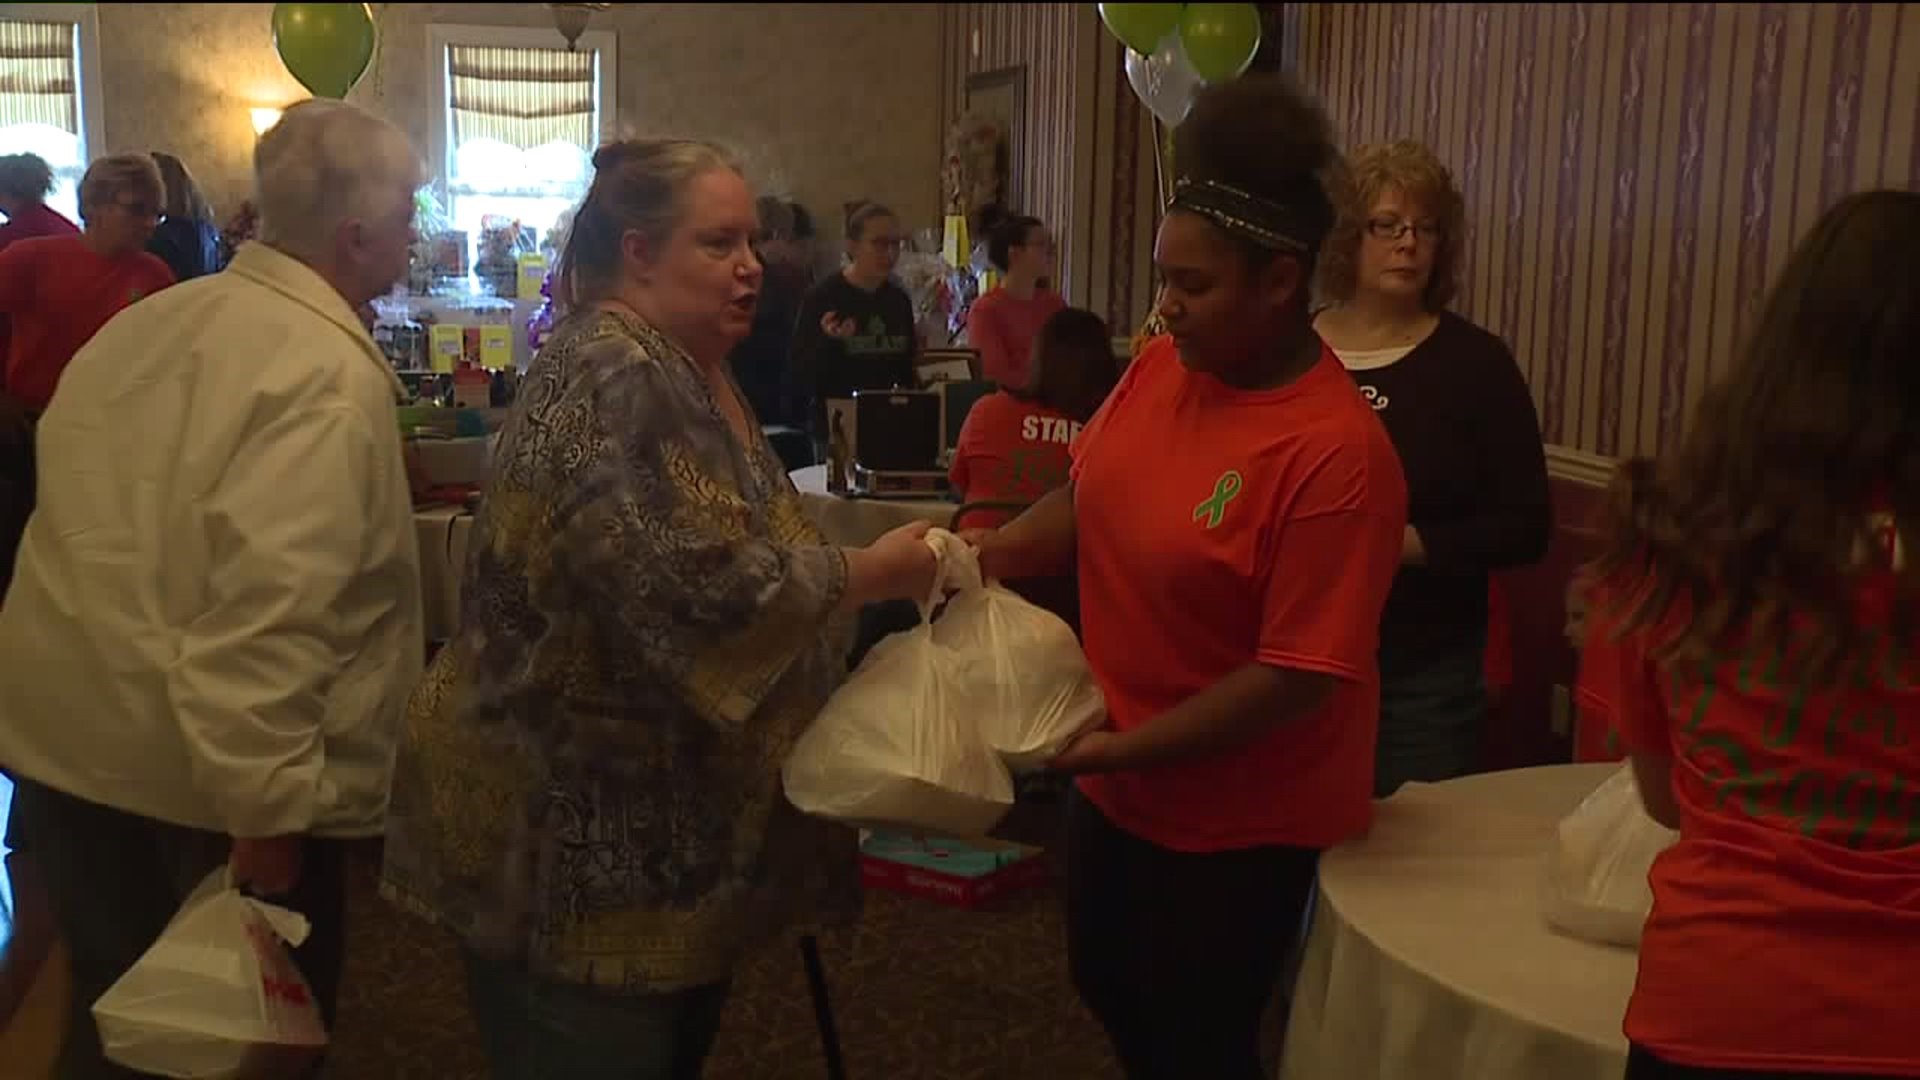 Pasta Dinner to Help Woman Battling Cancer